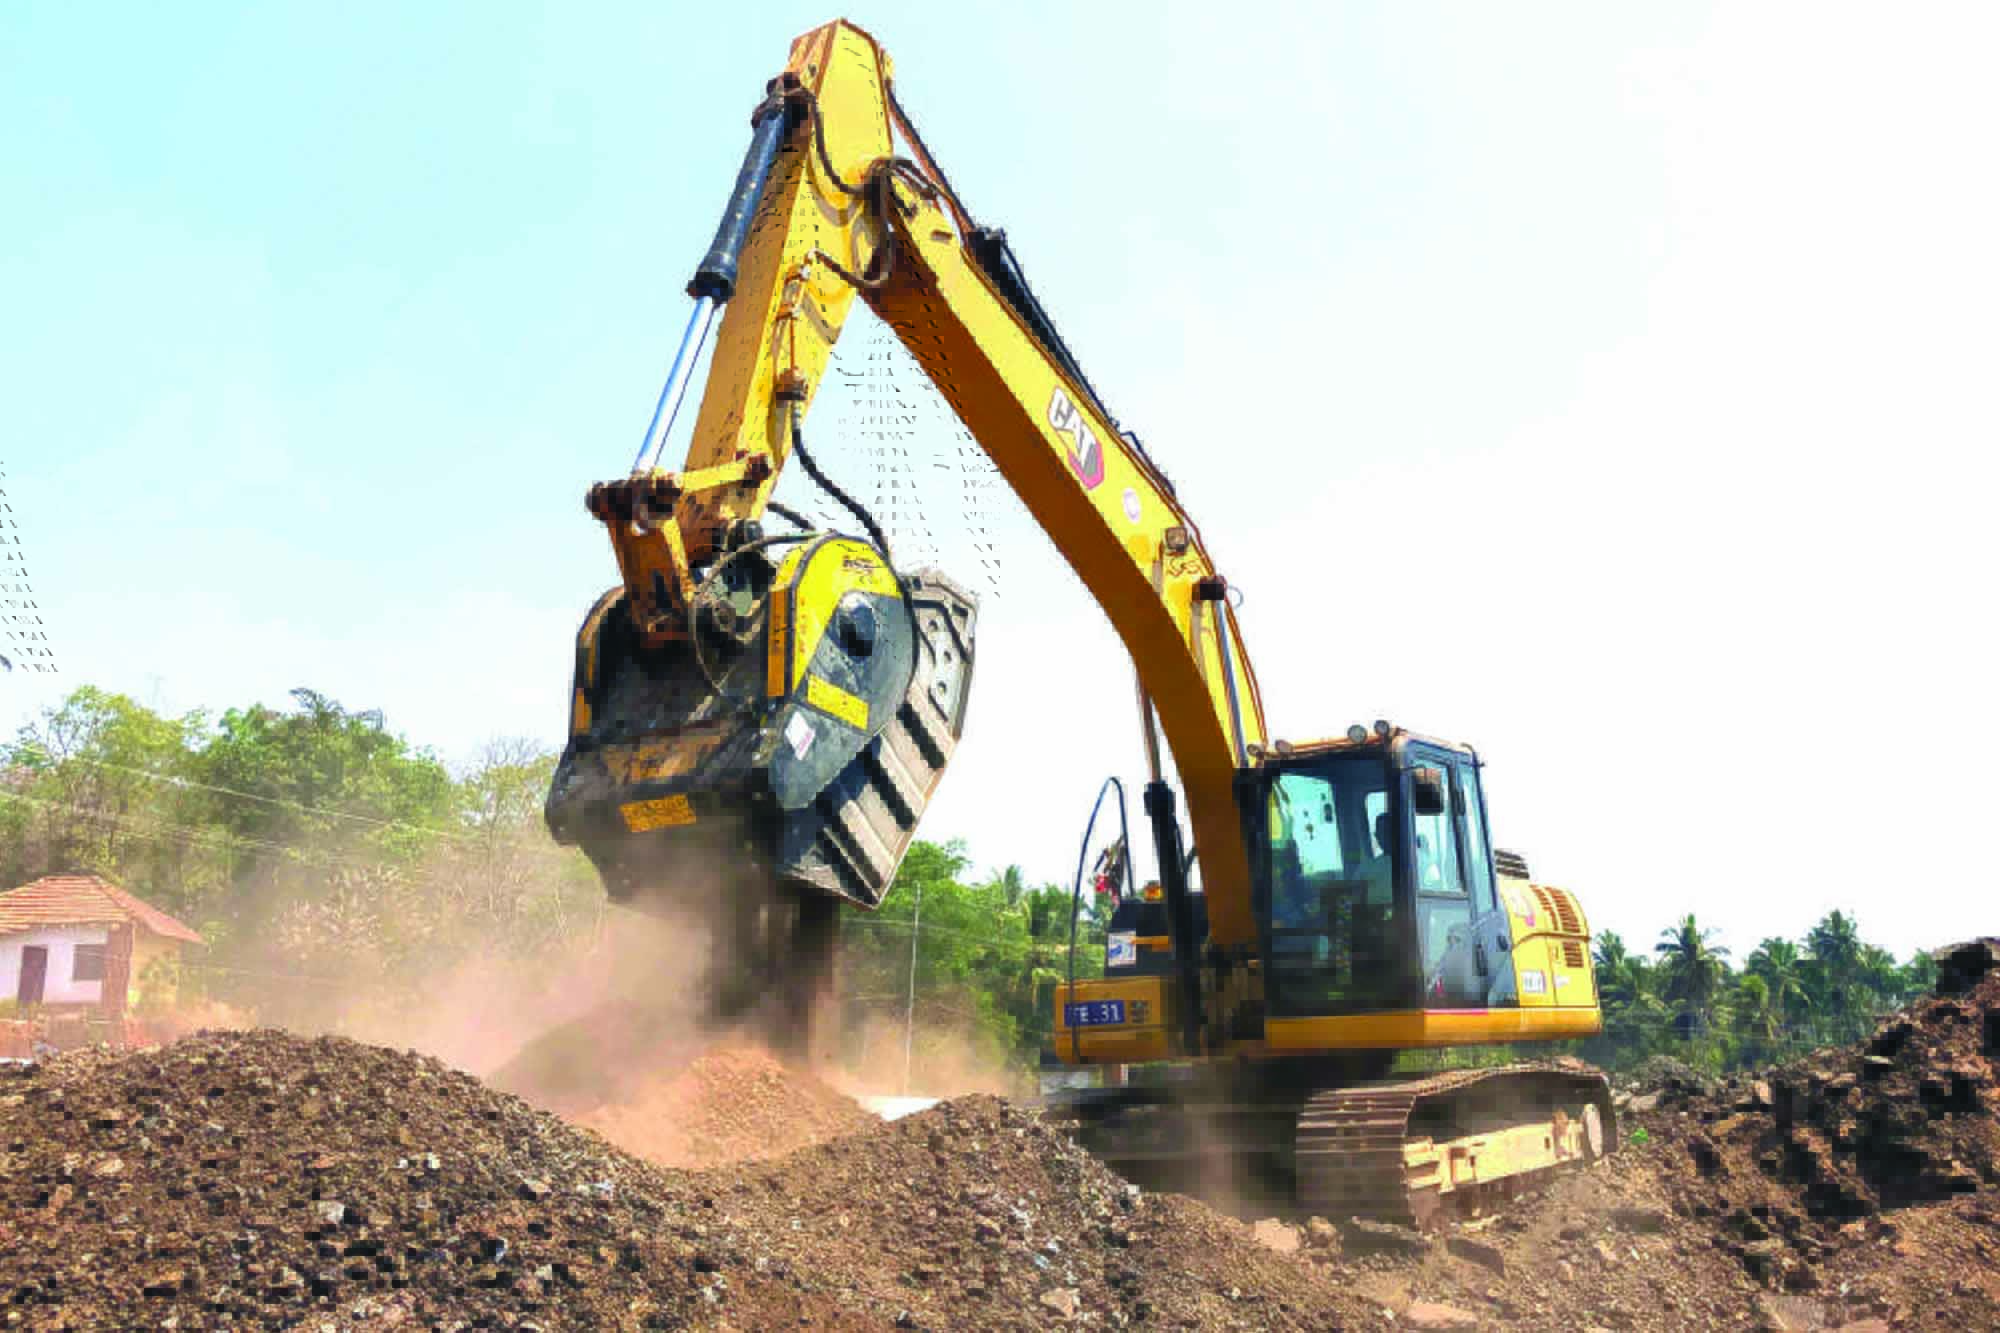 In the heart of Kerala, a prominent road construction company is rewriting the rules of the game with the ground breaking MB Crusher bucket.